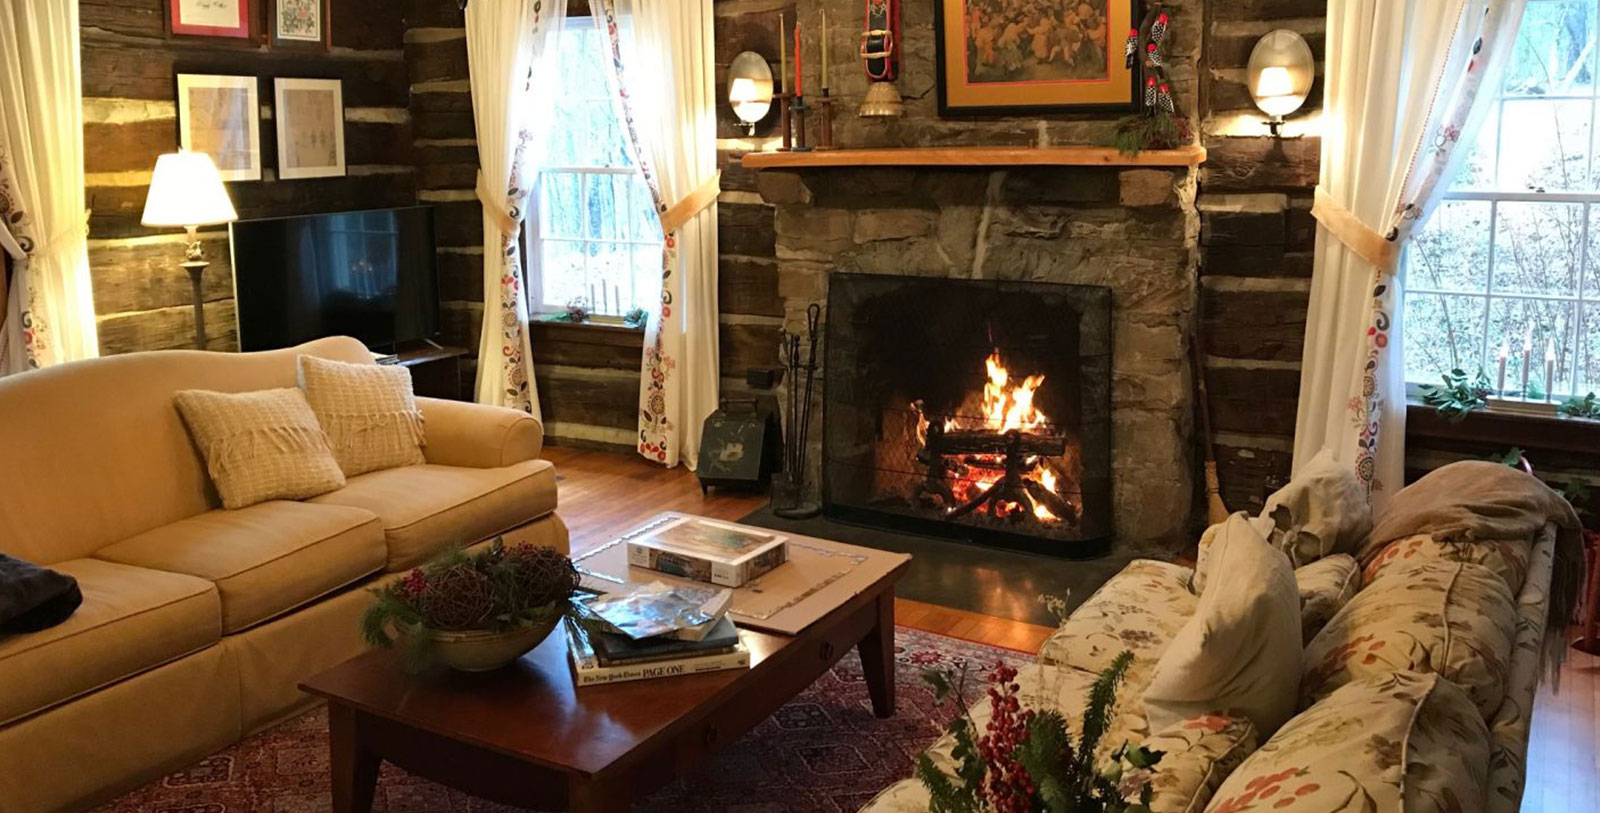 Experience a night in Boone Tavern Hotel's cozy Pine Croft Cottage, a piece of Berea and Appalachian History.